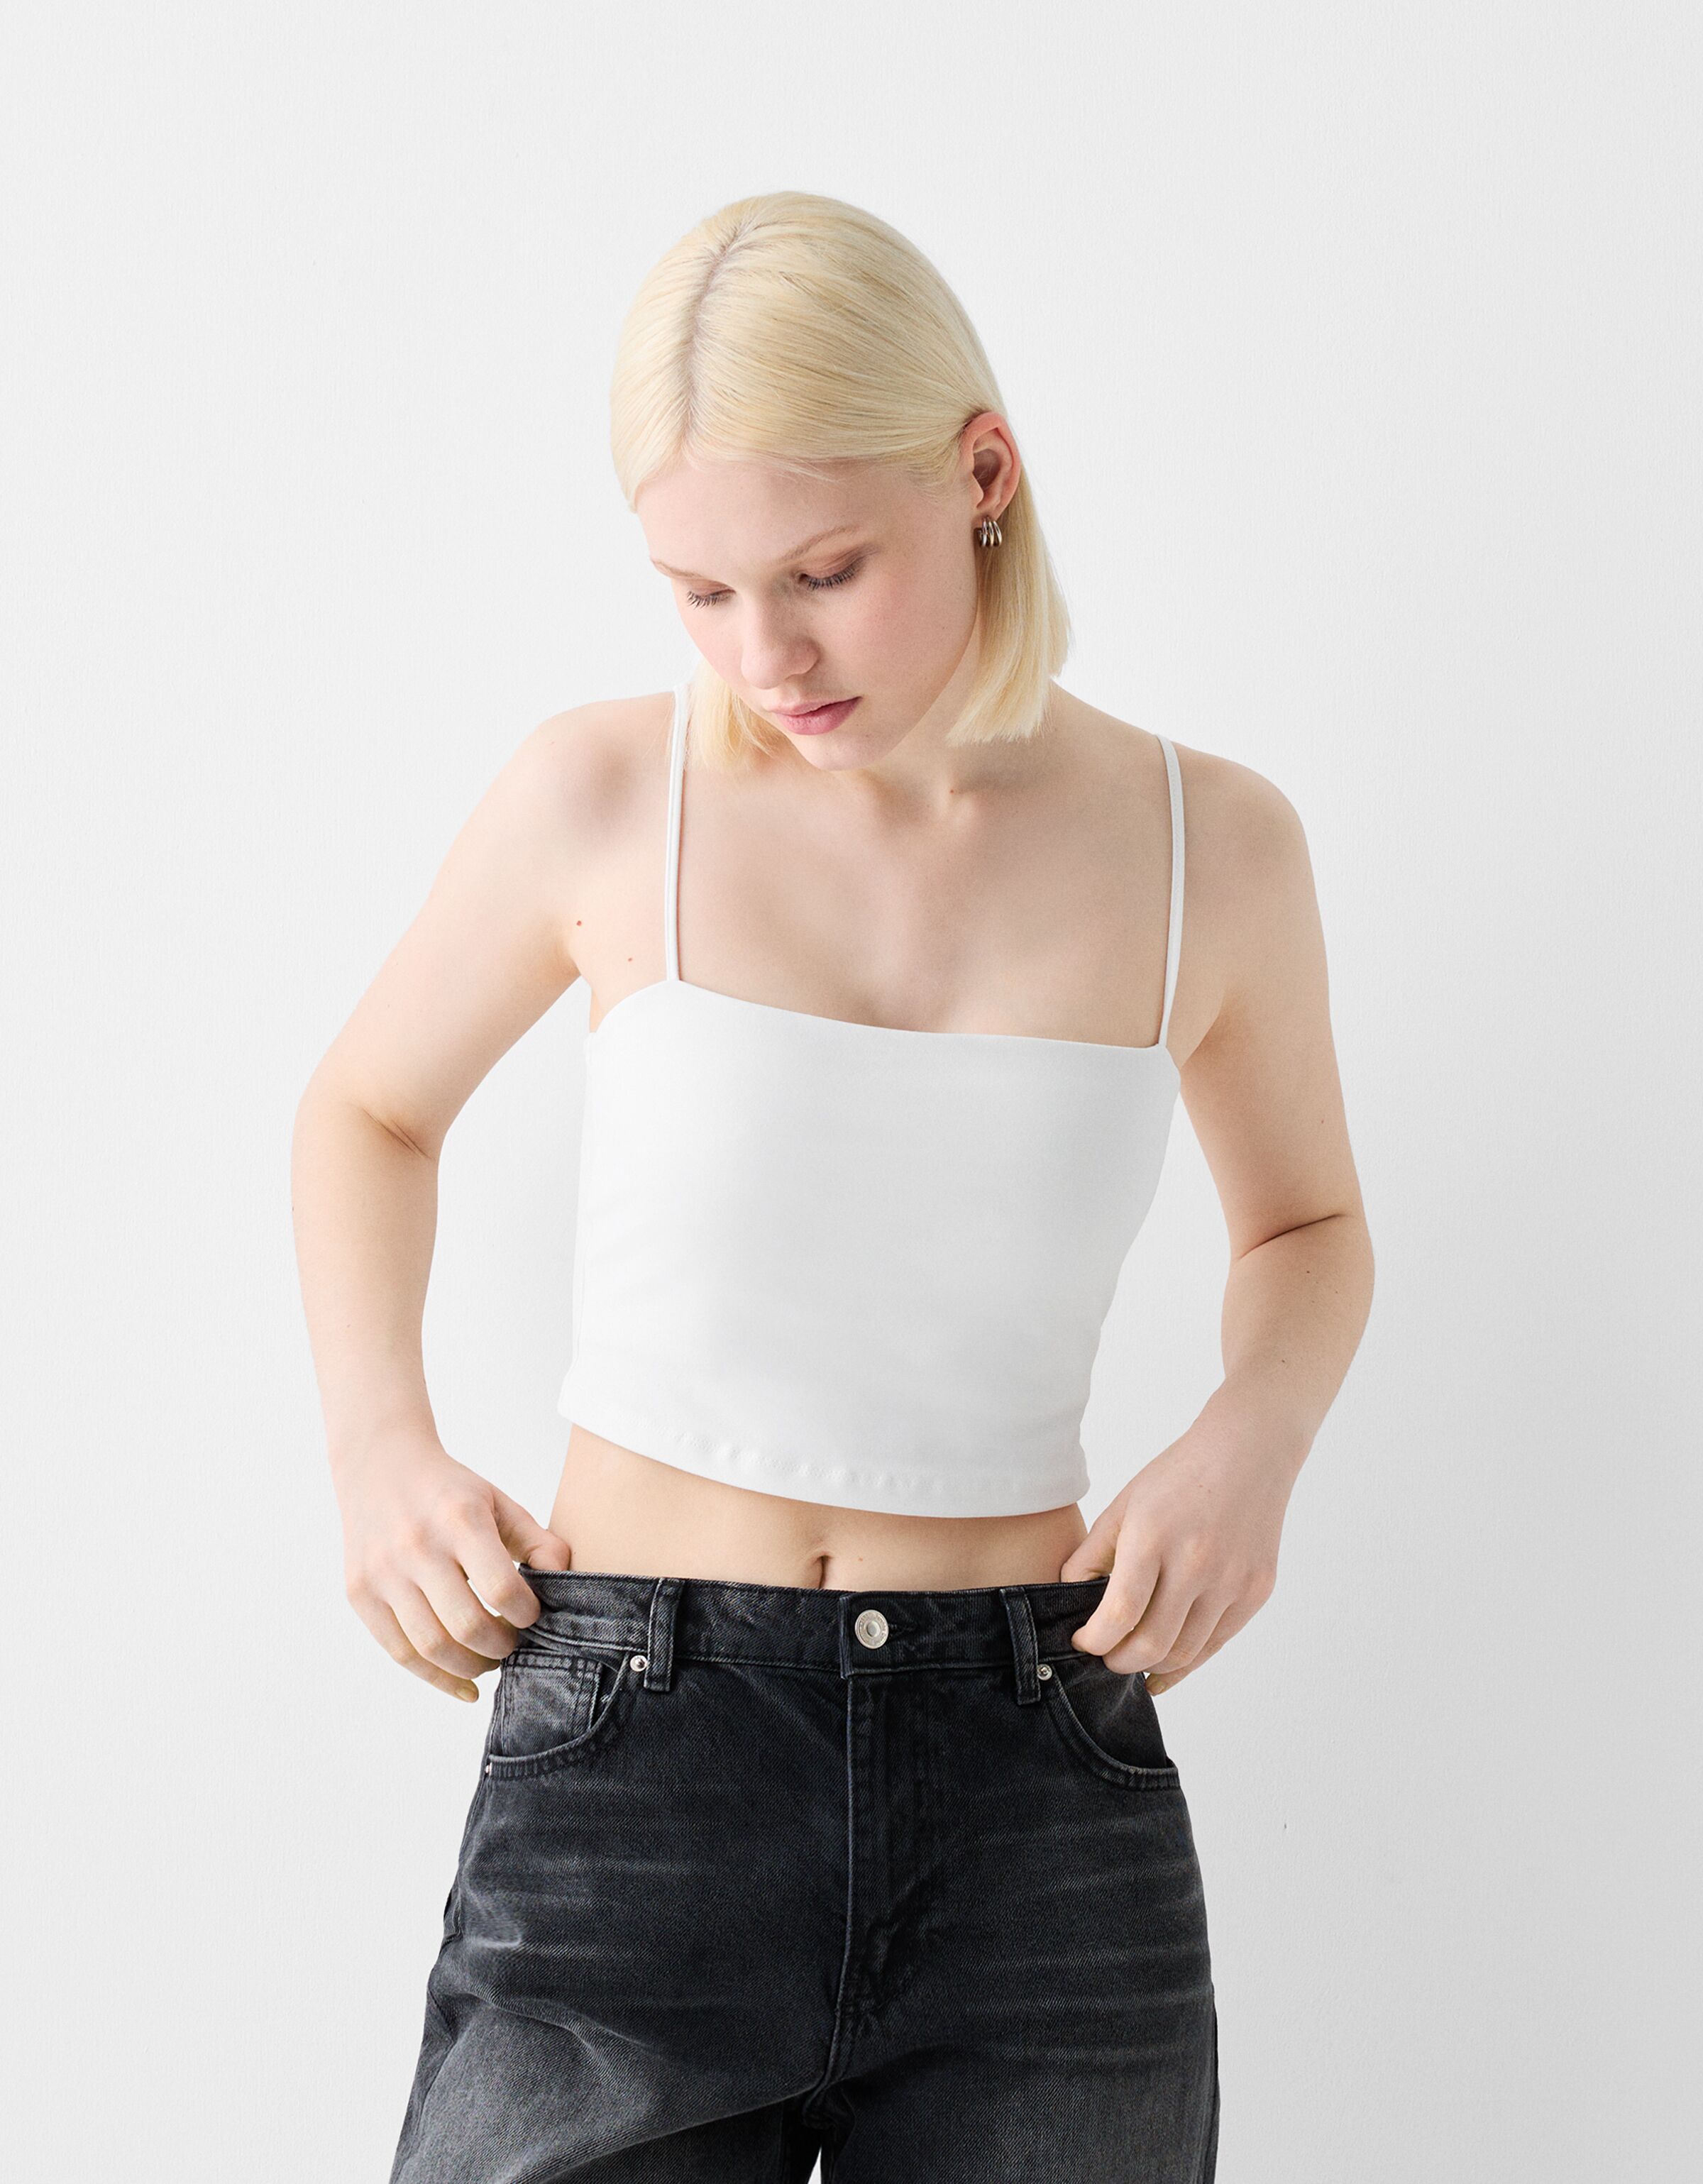 90s nylon blend top with straps - Tees and Tops - BSK Teen | Bershka